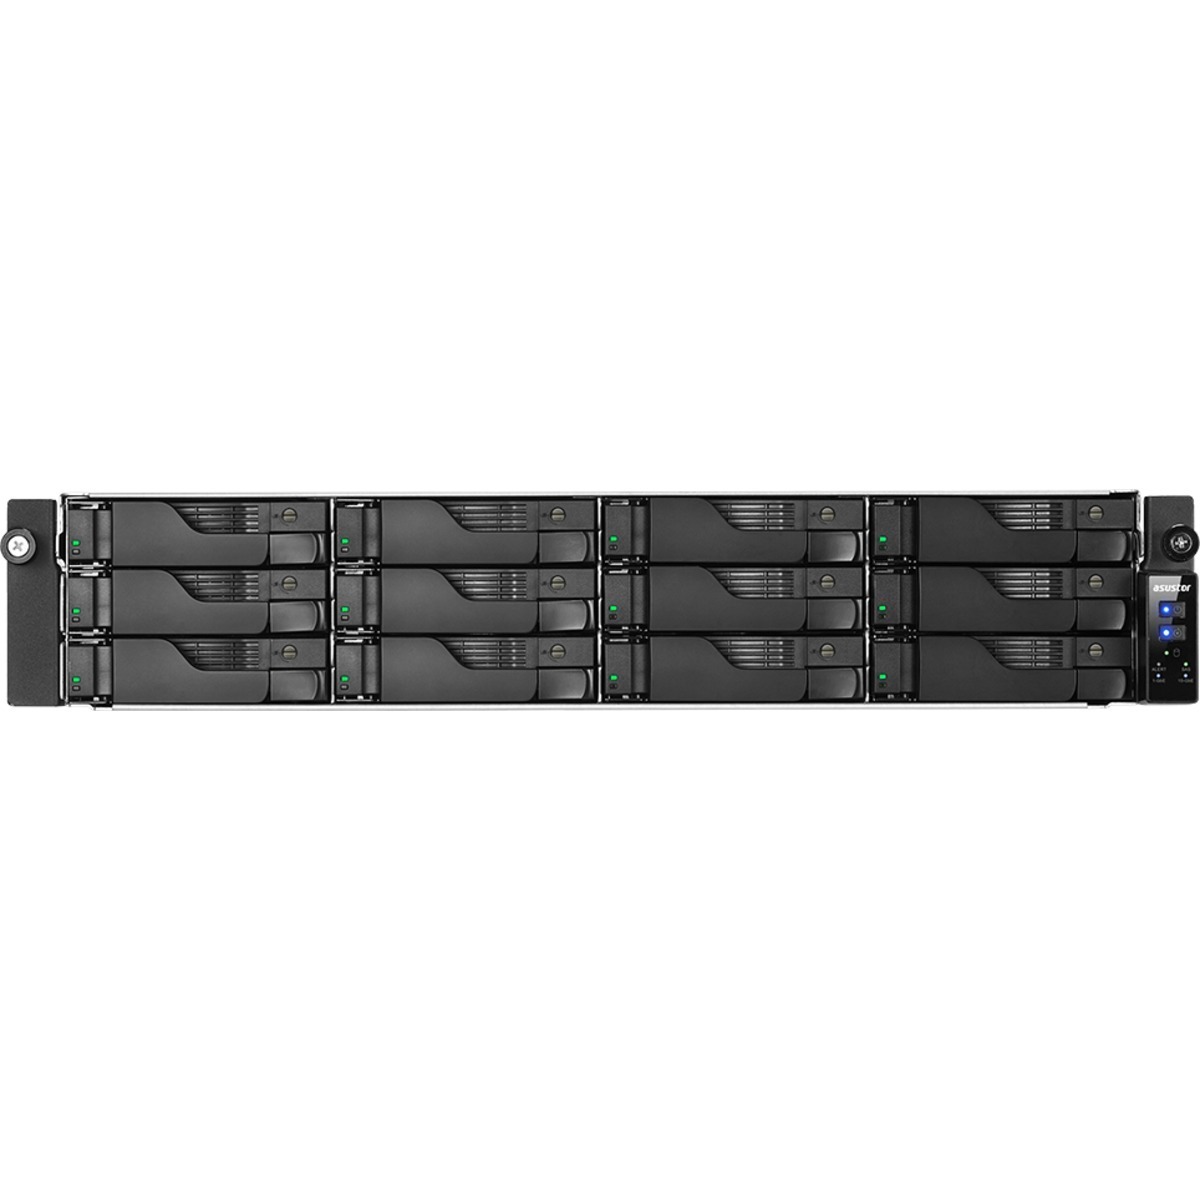 ASUSTOR AS7112RDX Lockerstor 12R Pro 126tb 12-Bay RackMount Large Business / Enterprise NAS - Network Attached Storage Device 9x14tb Western Digital Red Pro WD142KFGX 3.5 7200rpm SATA 6Gb/s HDD NAS Class Drives Installed - Burn-In Tested AS7112RDX Lockerstor 12R Pro